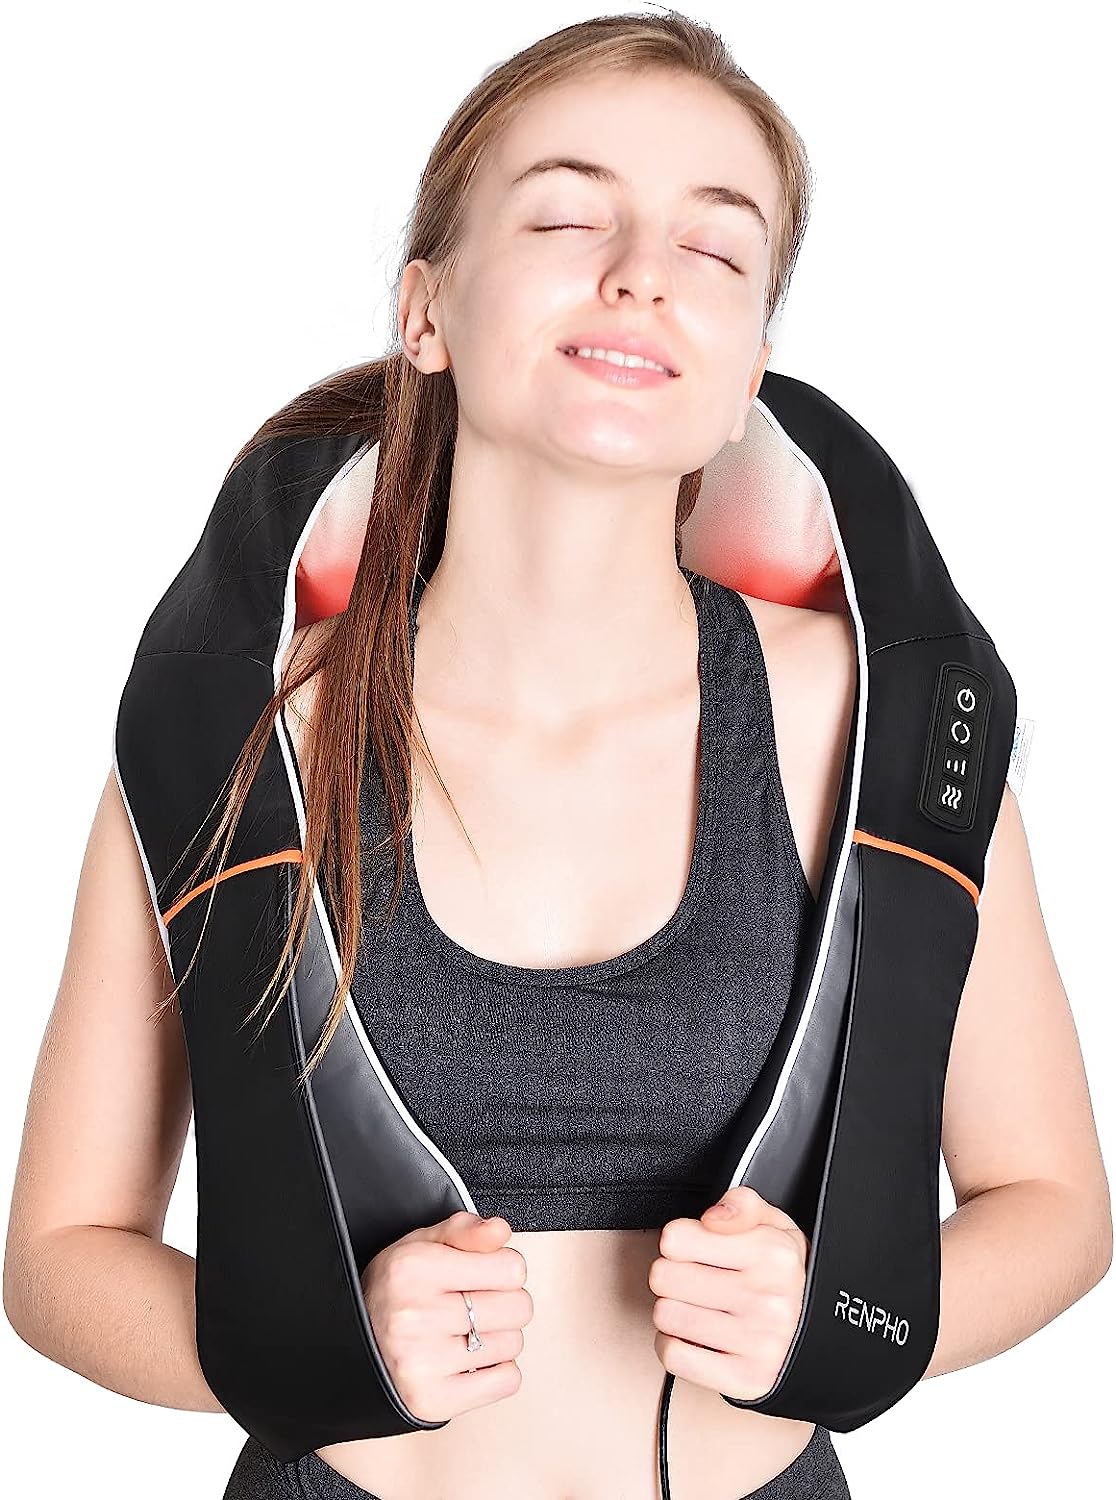 Back Massager with Adjustable Heat and Straps, Shiatsu Neck Massagers Deep  Tissue Kneading for Shoulder Muscle Pain Relax Relief, Birthday Gifts,  Carrying Bag